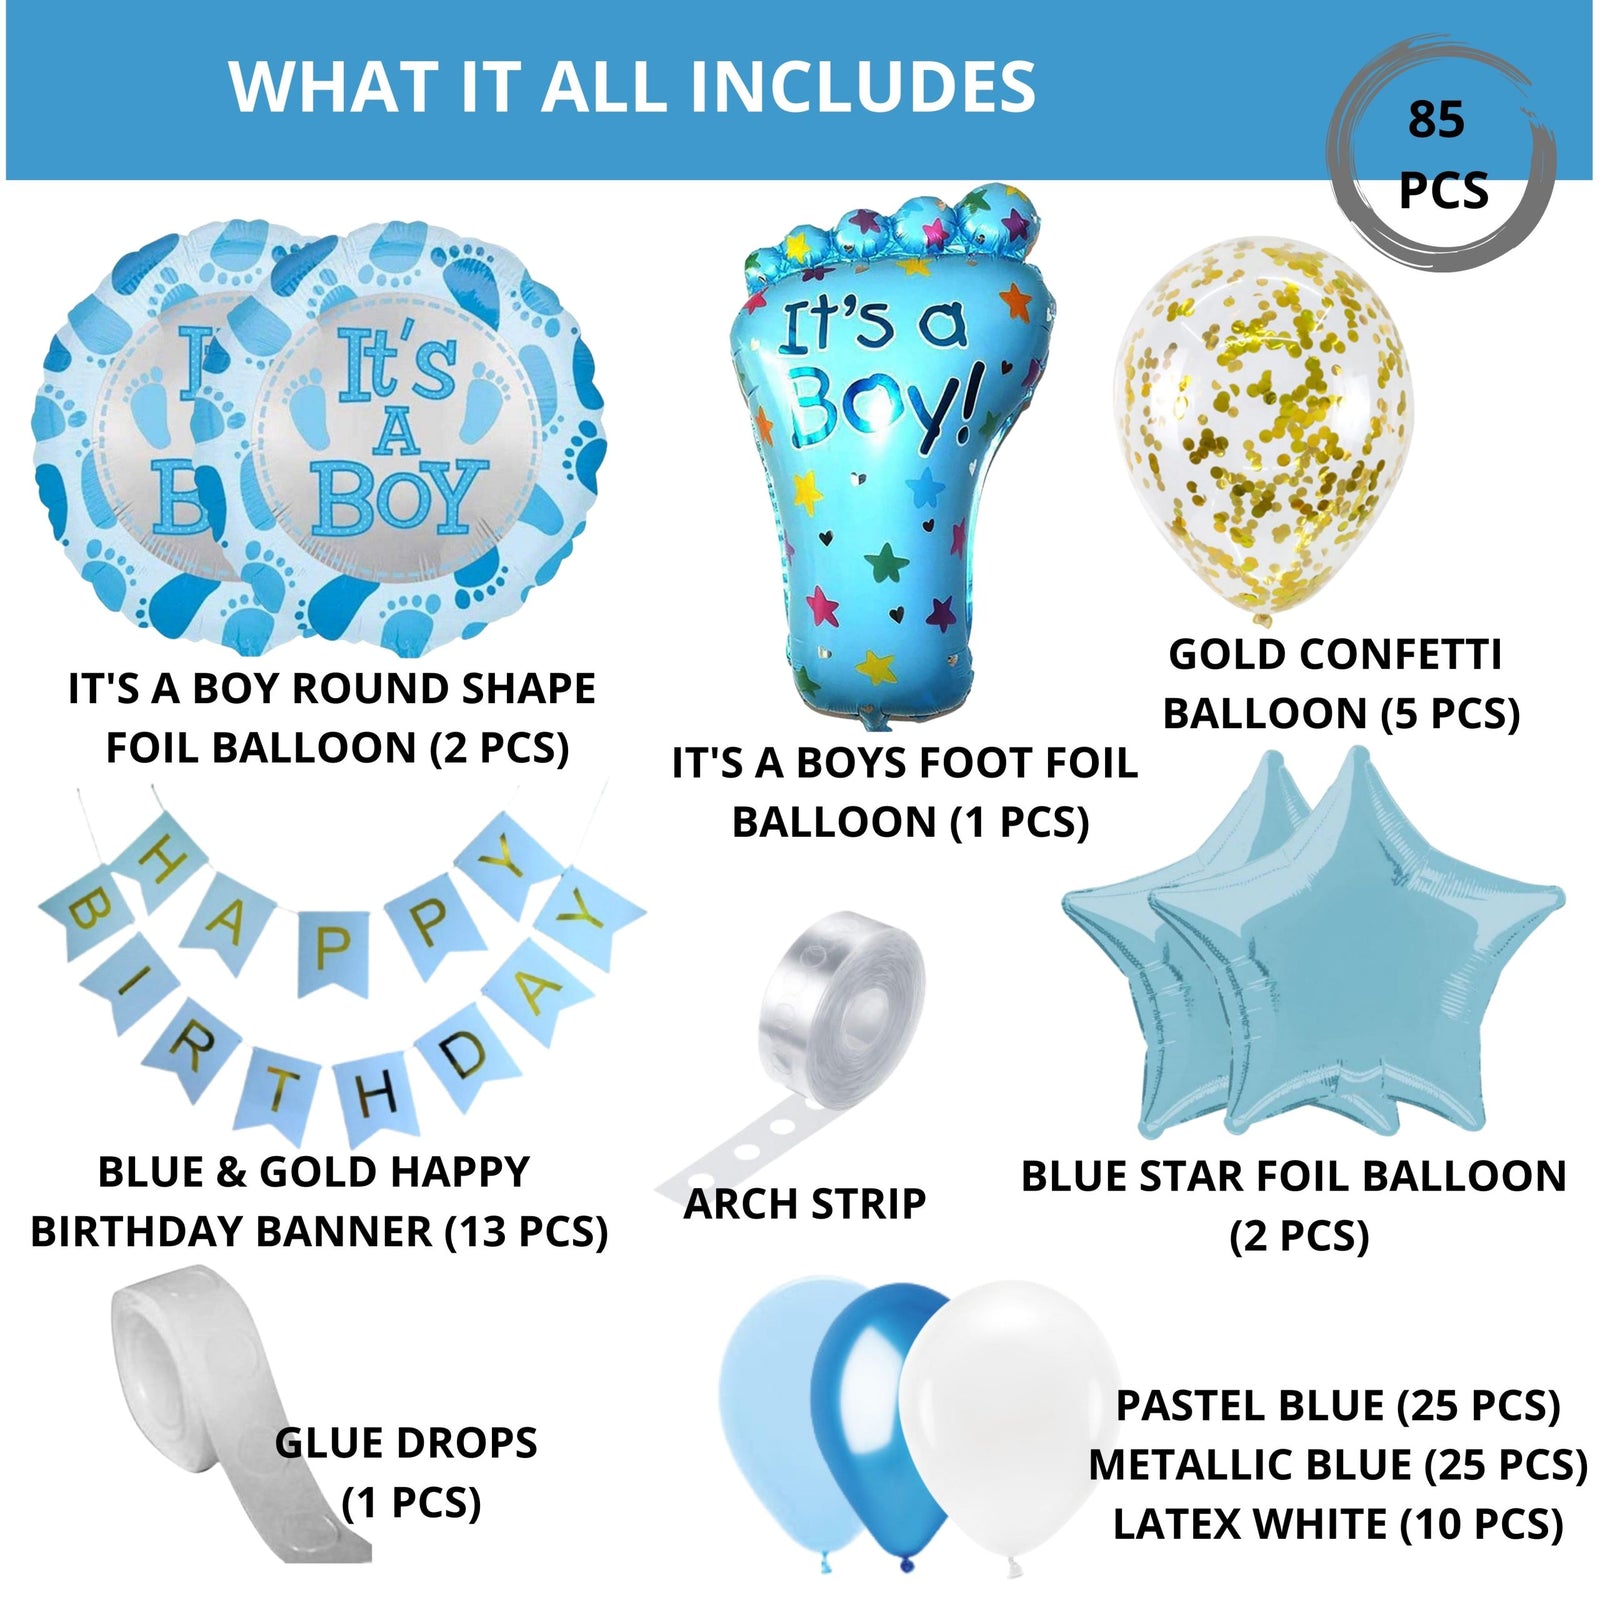 Birthday Decoration kit for 1st Birthday Boys-85 Pcs Bday With Blue Banner, Blue Star, Balloons, Foil Balloons, 1st Birthday For Kids